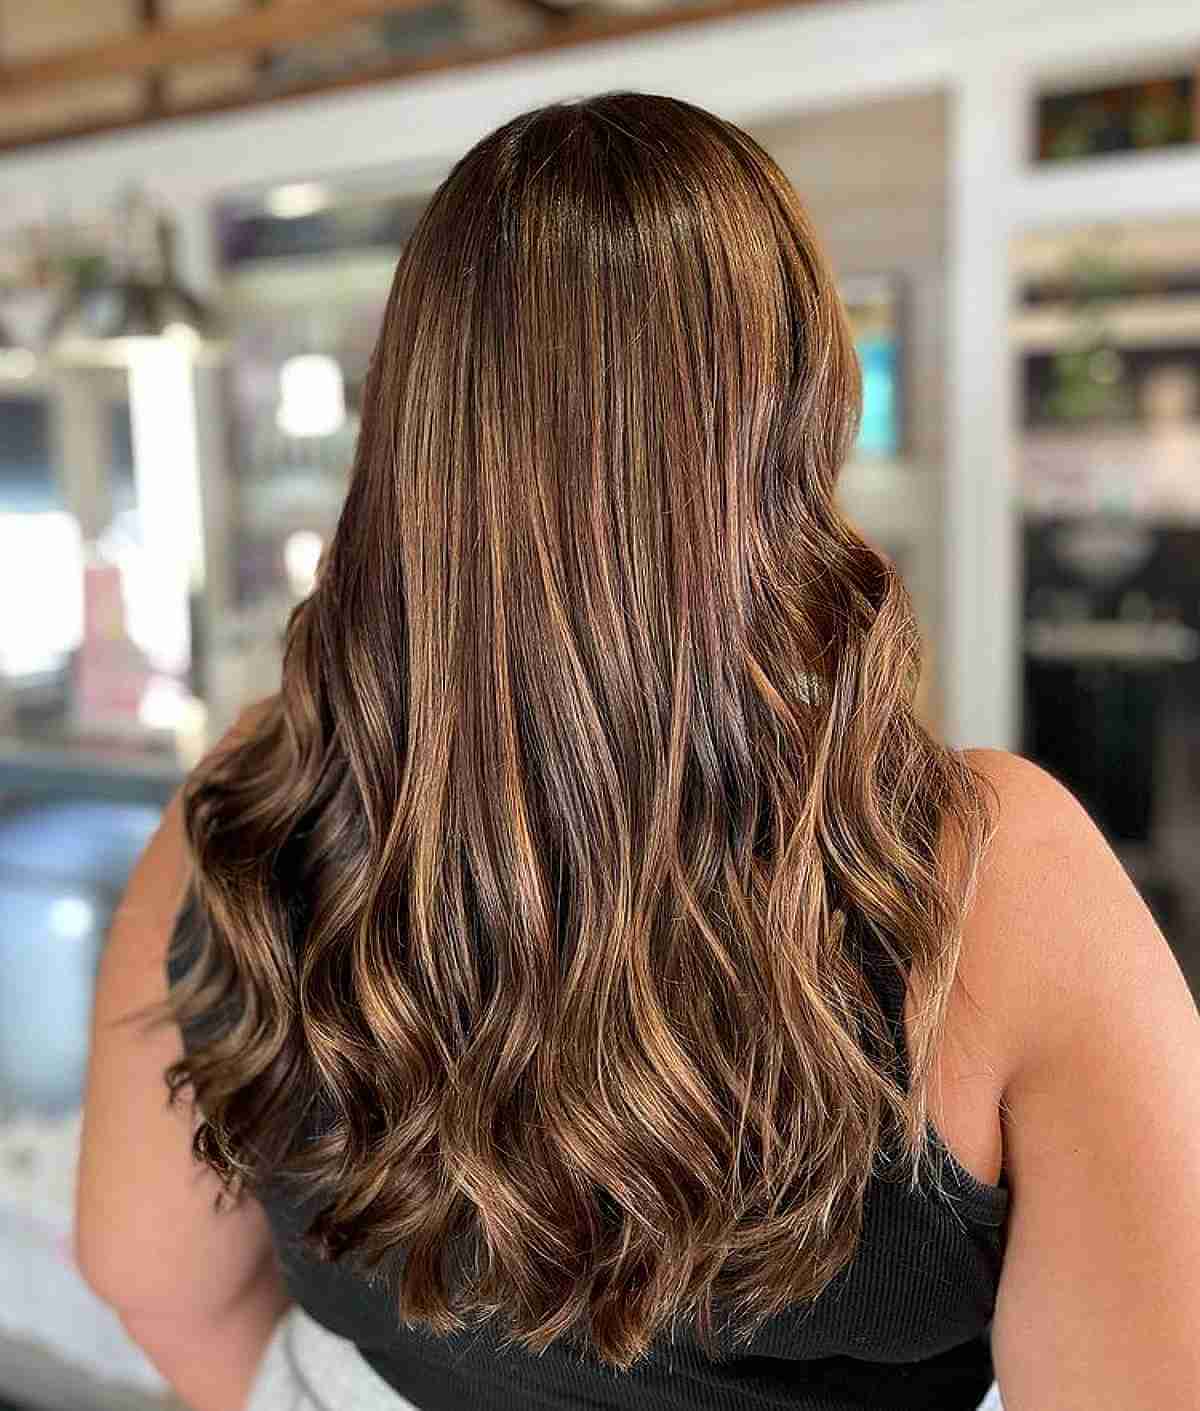 Caramel Balayage on Brown Hair with Curled Ends